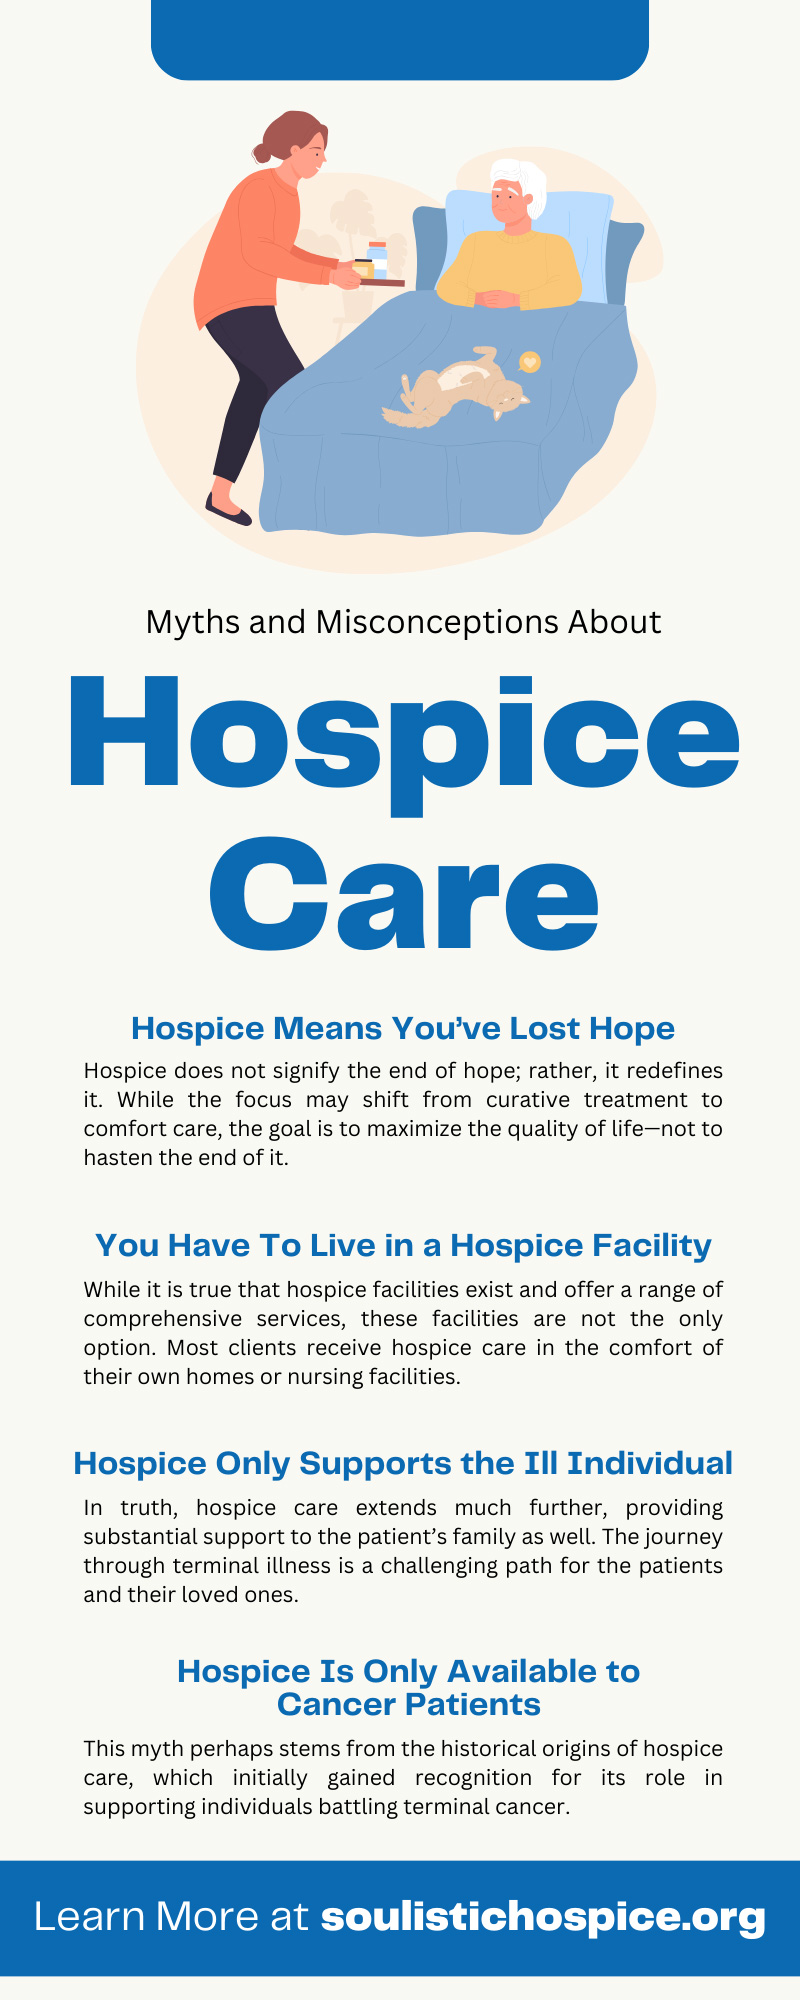 Myths and Misconceptions About Hospice Care